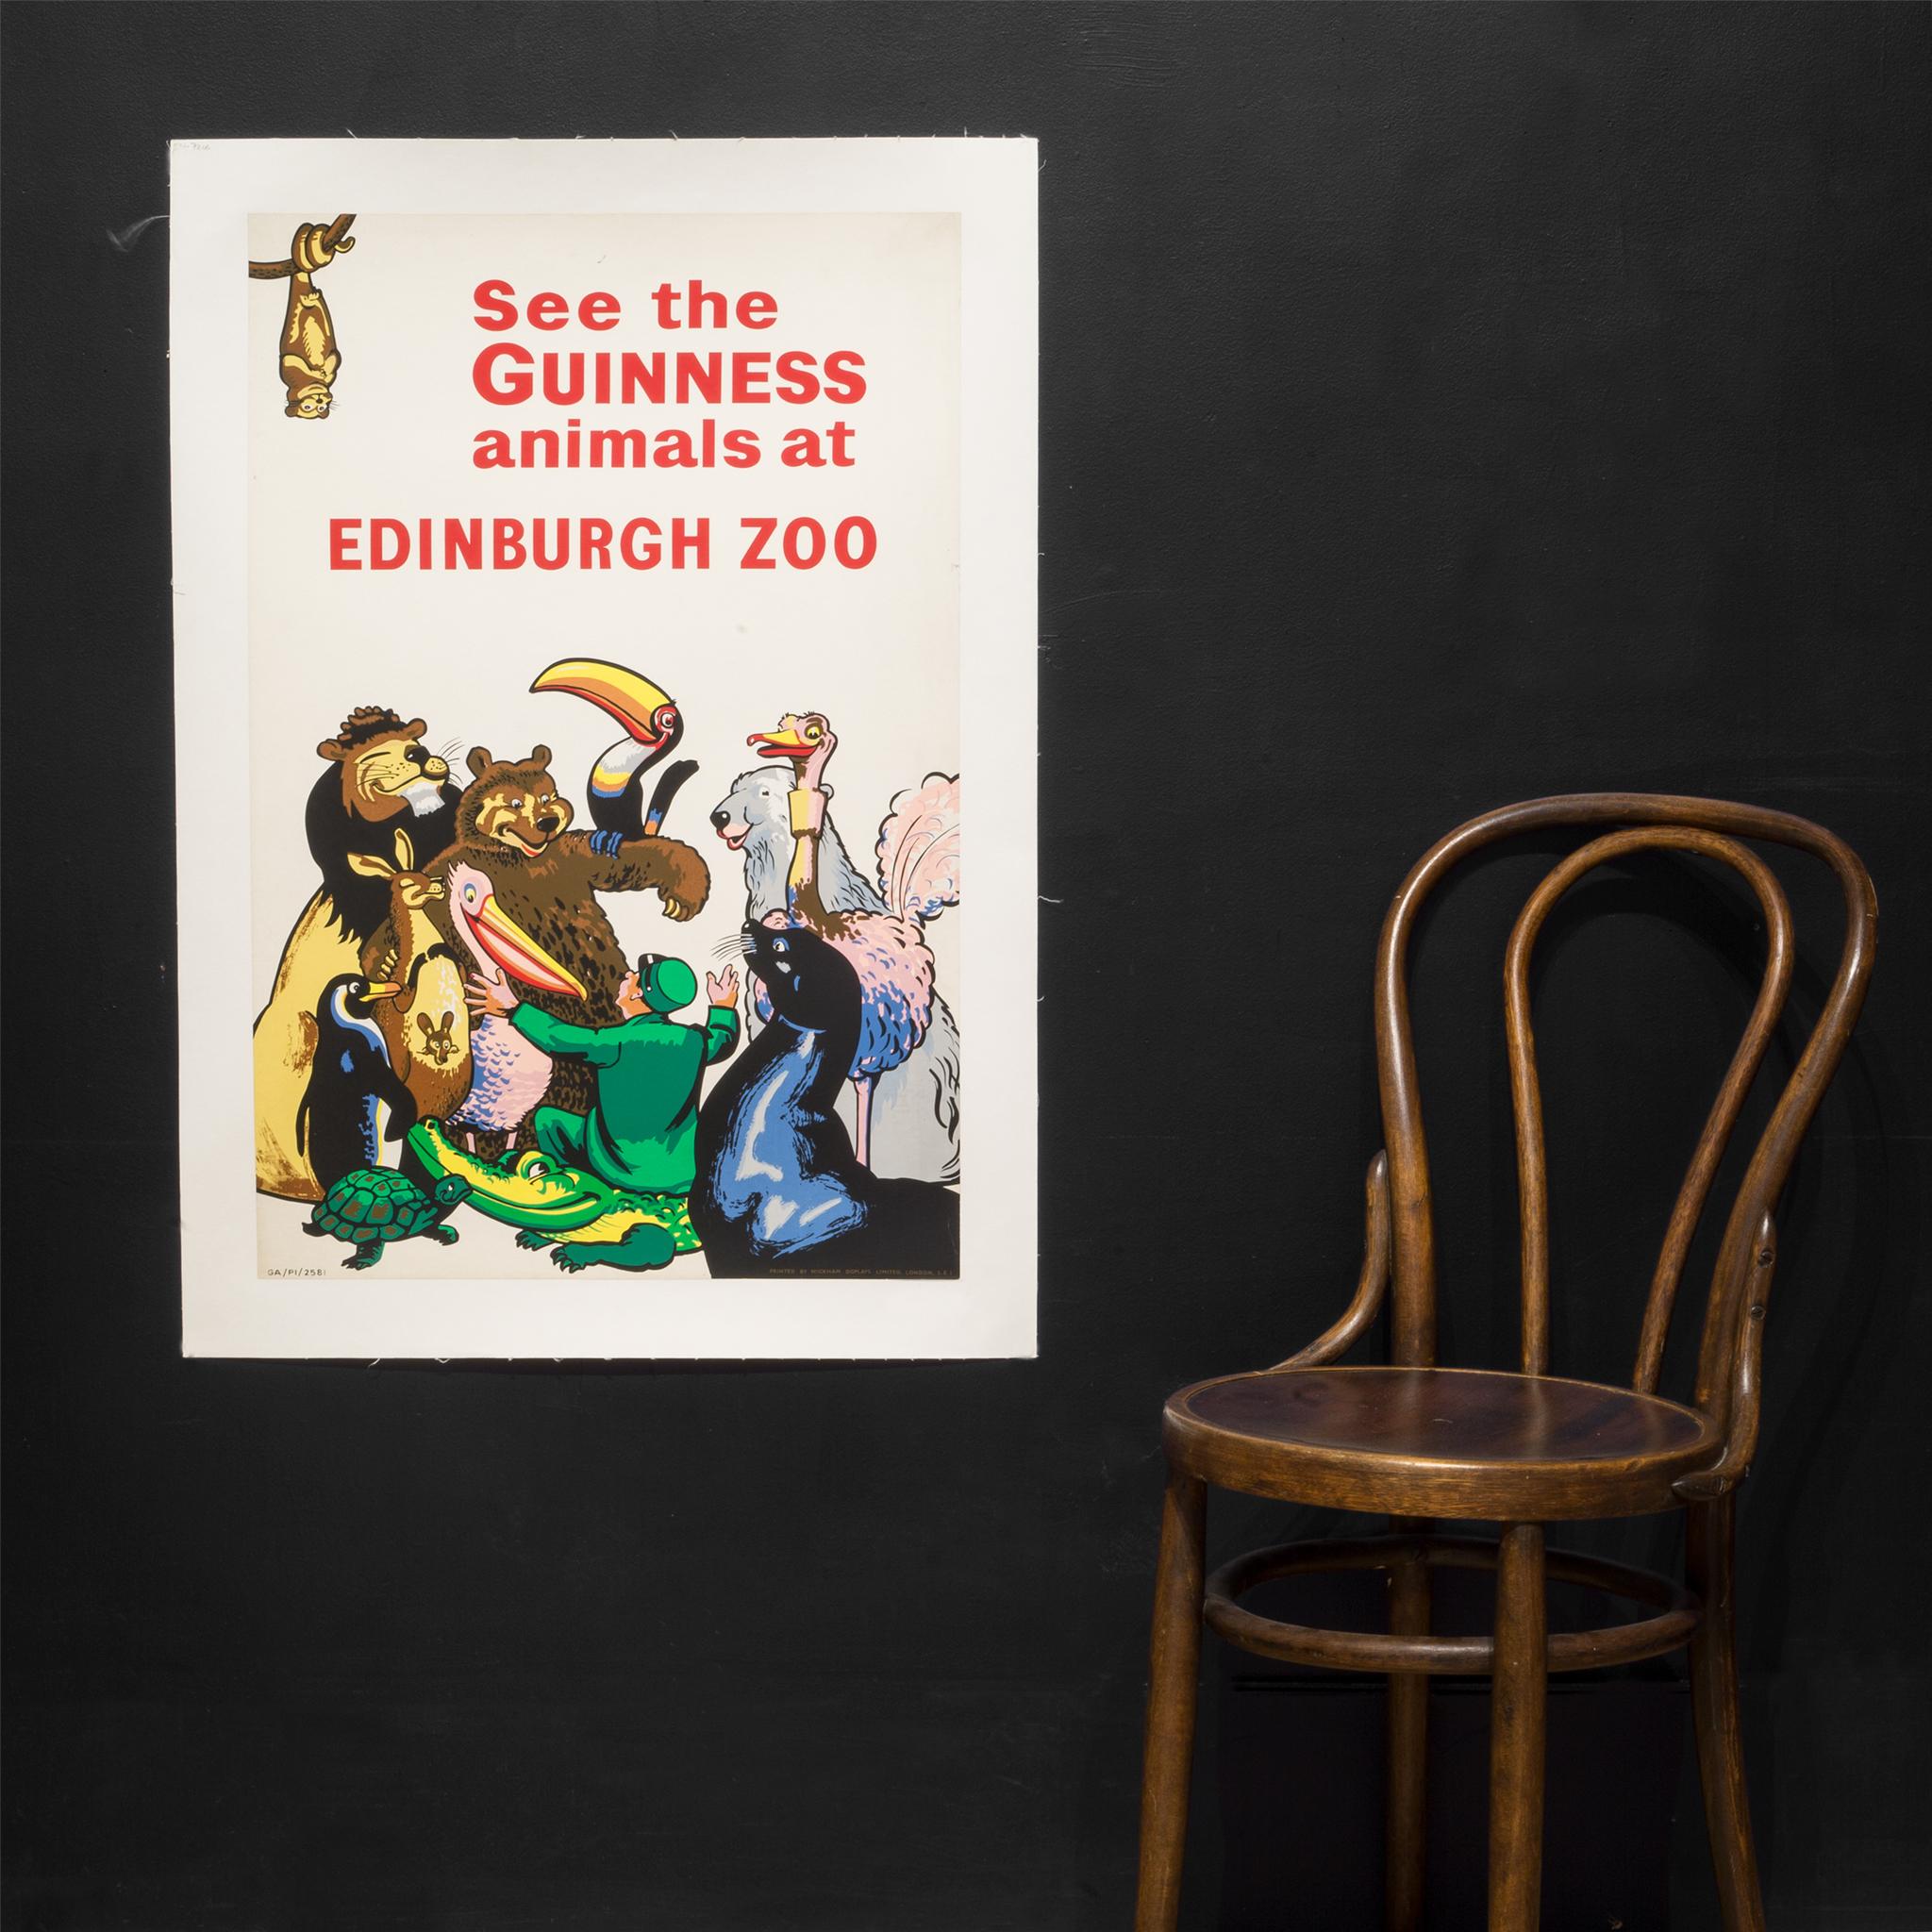 About

The poster is a joint effort of Guinness Beer and the Edinburgh Zoo to promote visits to the zoo where animals featured in Guinness advertising can be seen.
This is an original vintage poster and not a reproduction. This poster is